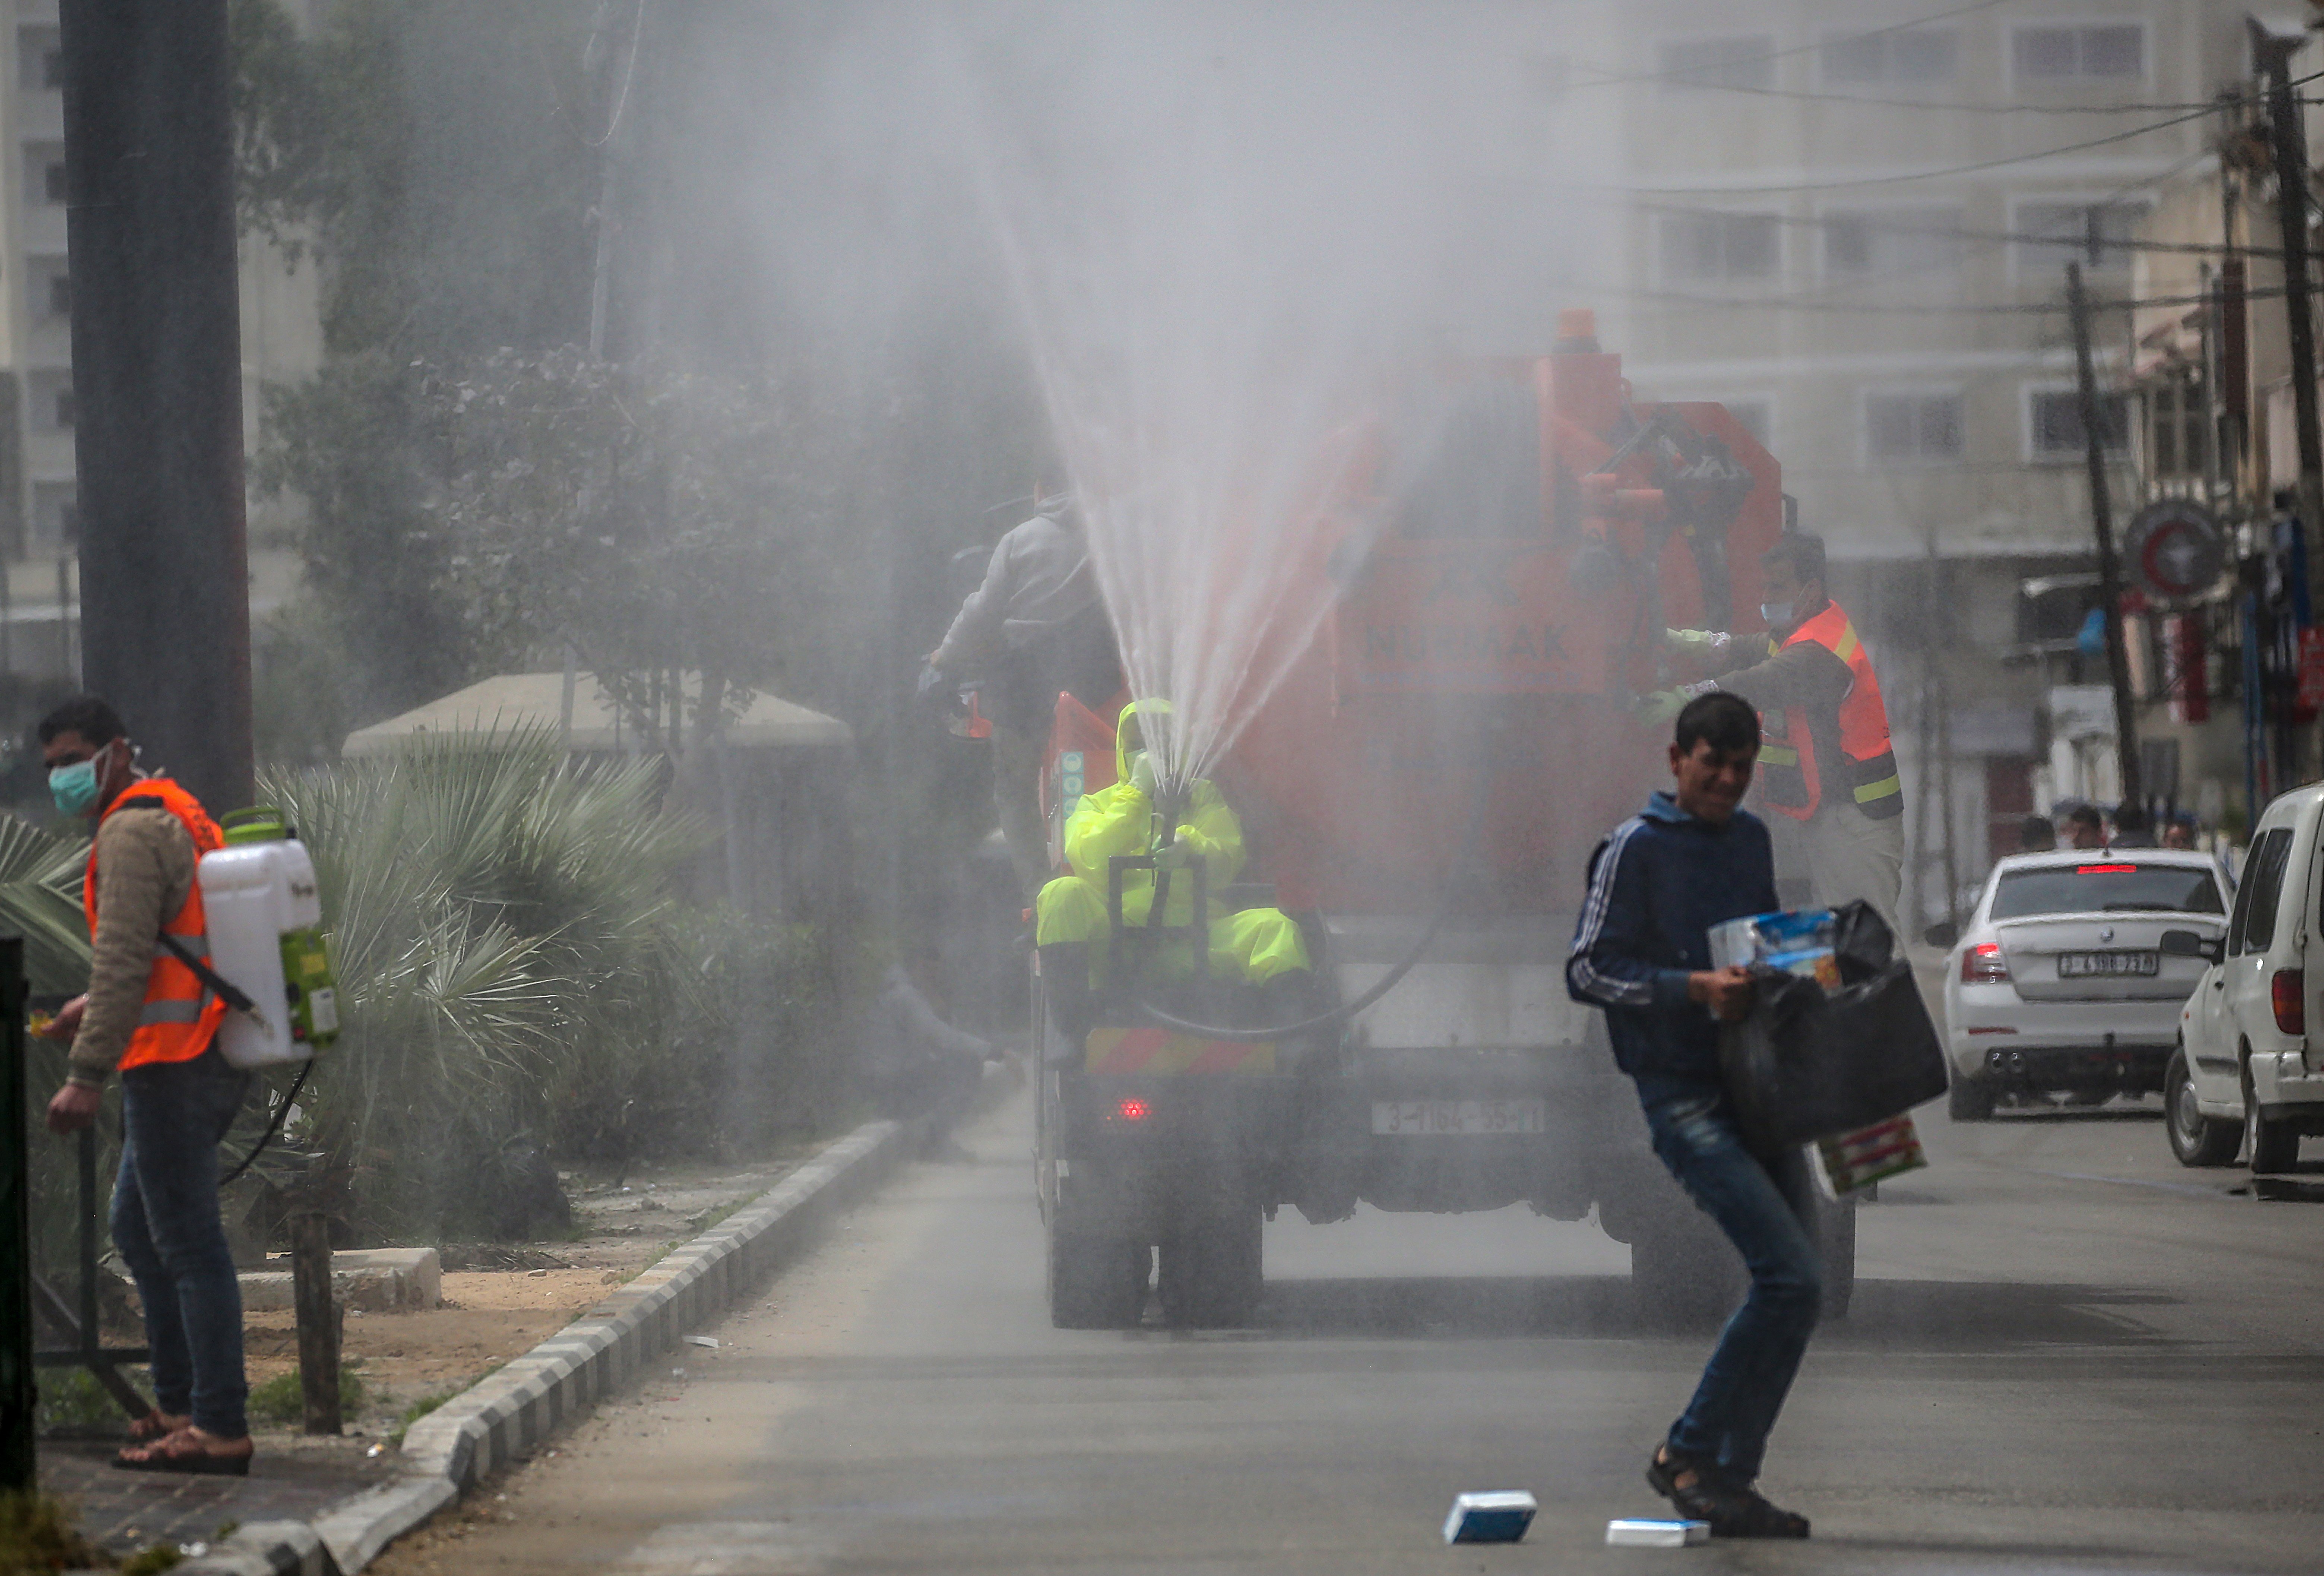 A Palestinian man sprays disinfectant as a precaution against the spread of the SARS-CoV-2 coronavirus which causes the COVID-19 disease, in the streets of Gaza City, Monday, March 30, 2020. (EPA Photo)